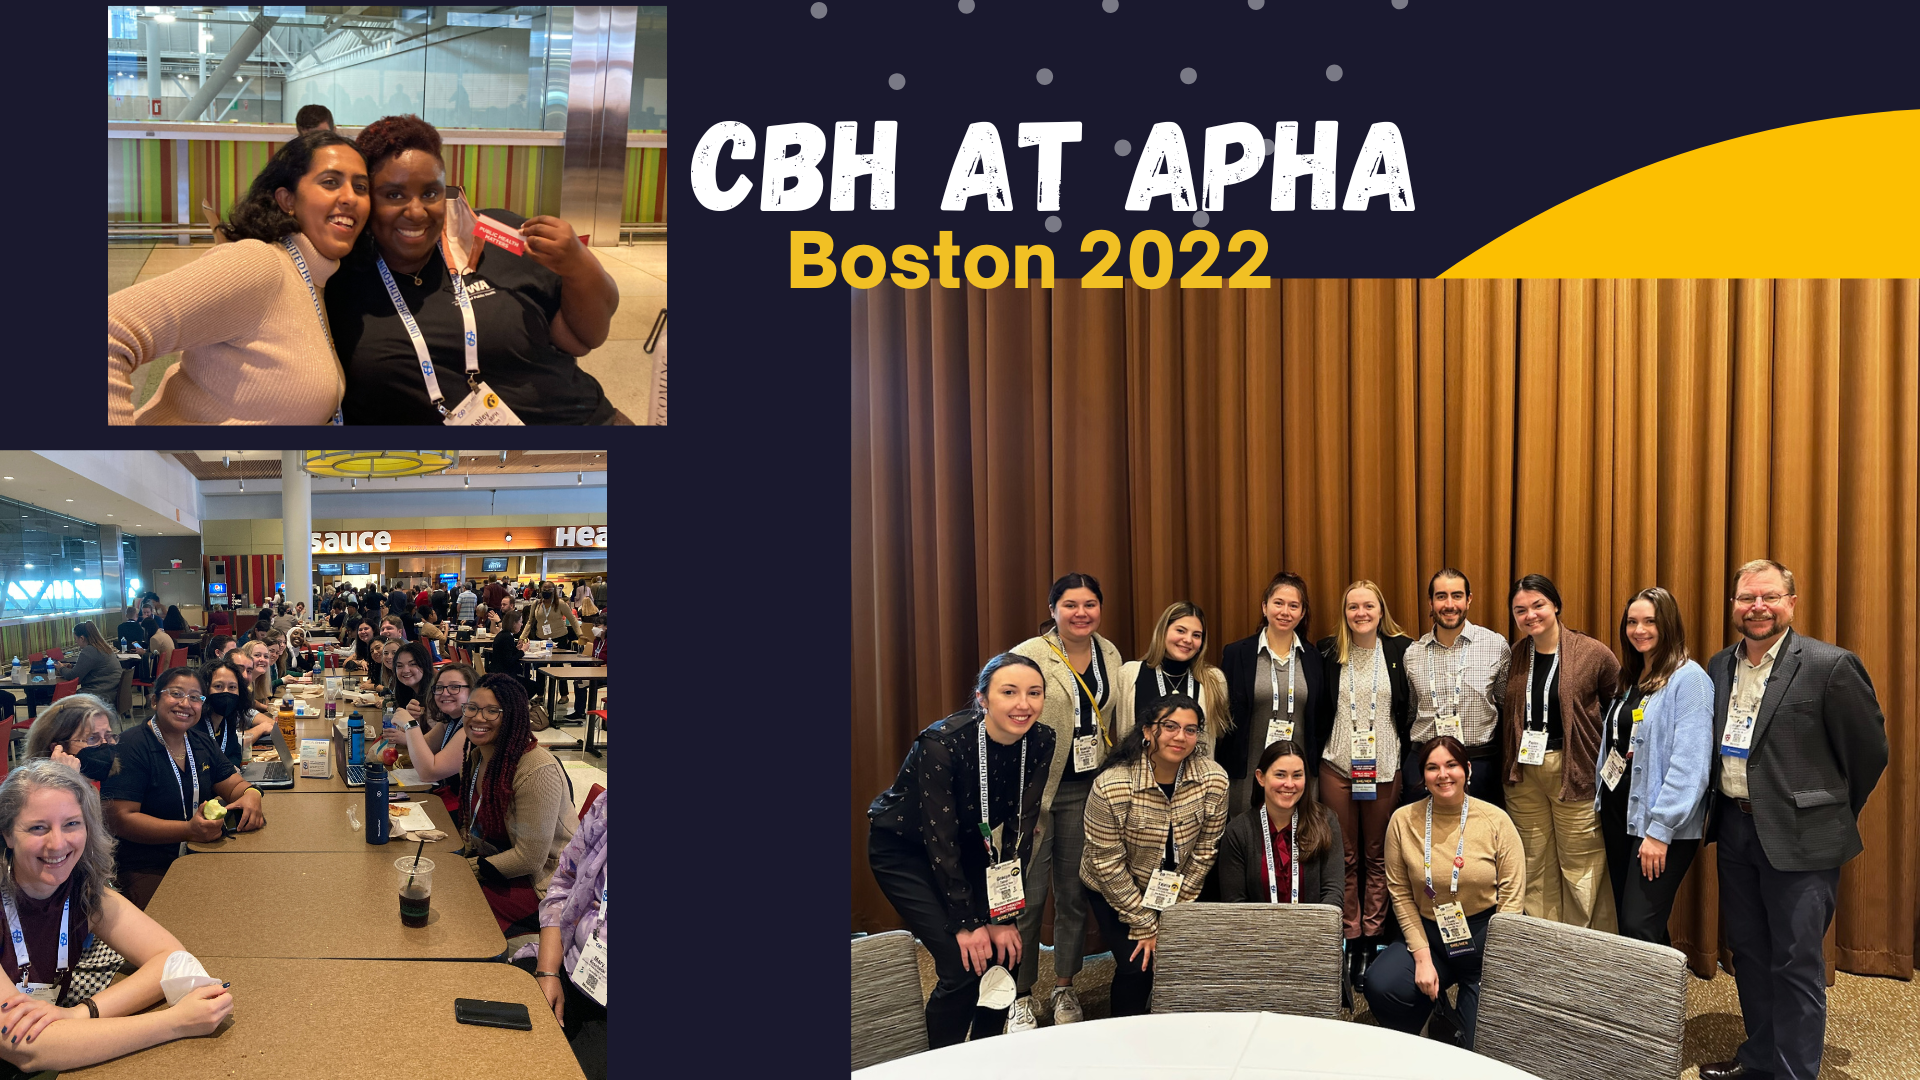 CBH at APHA